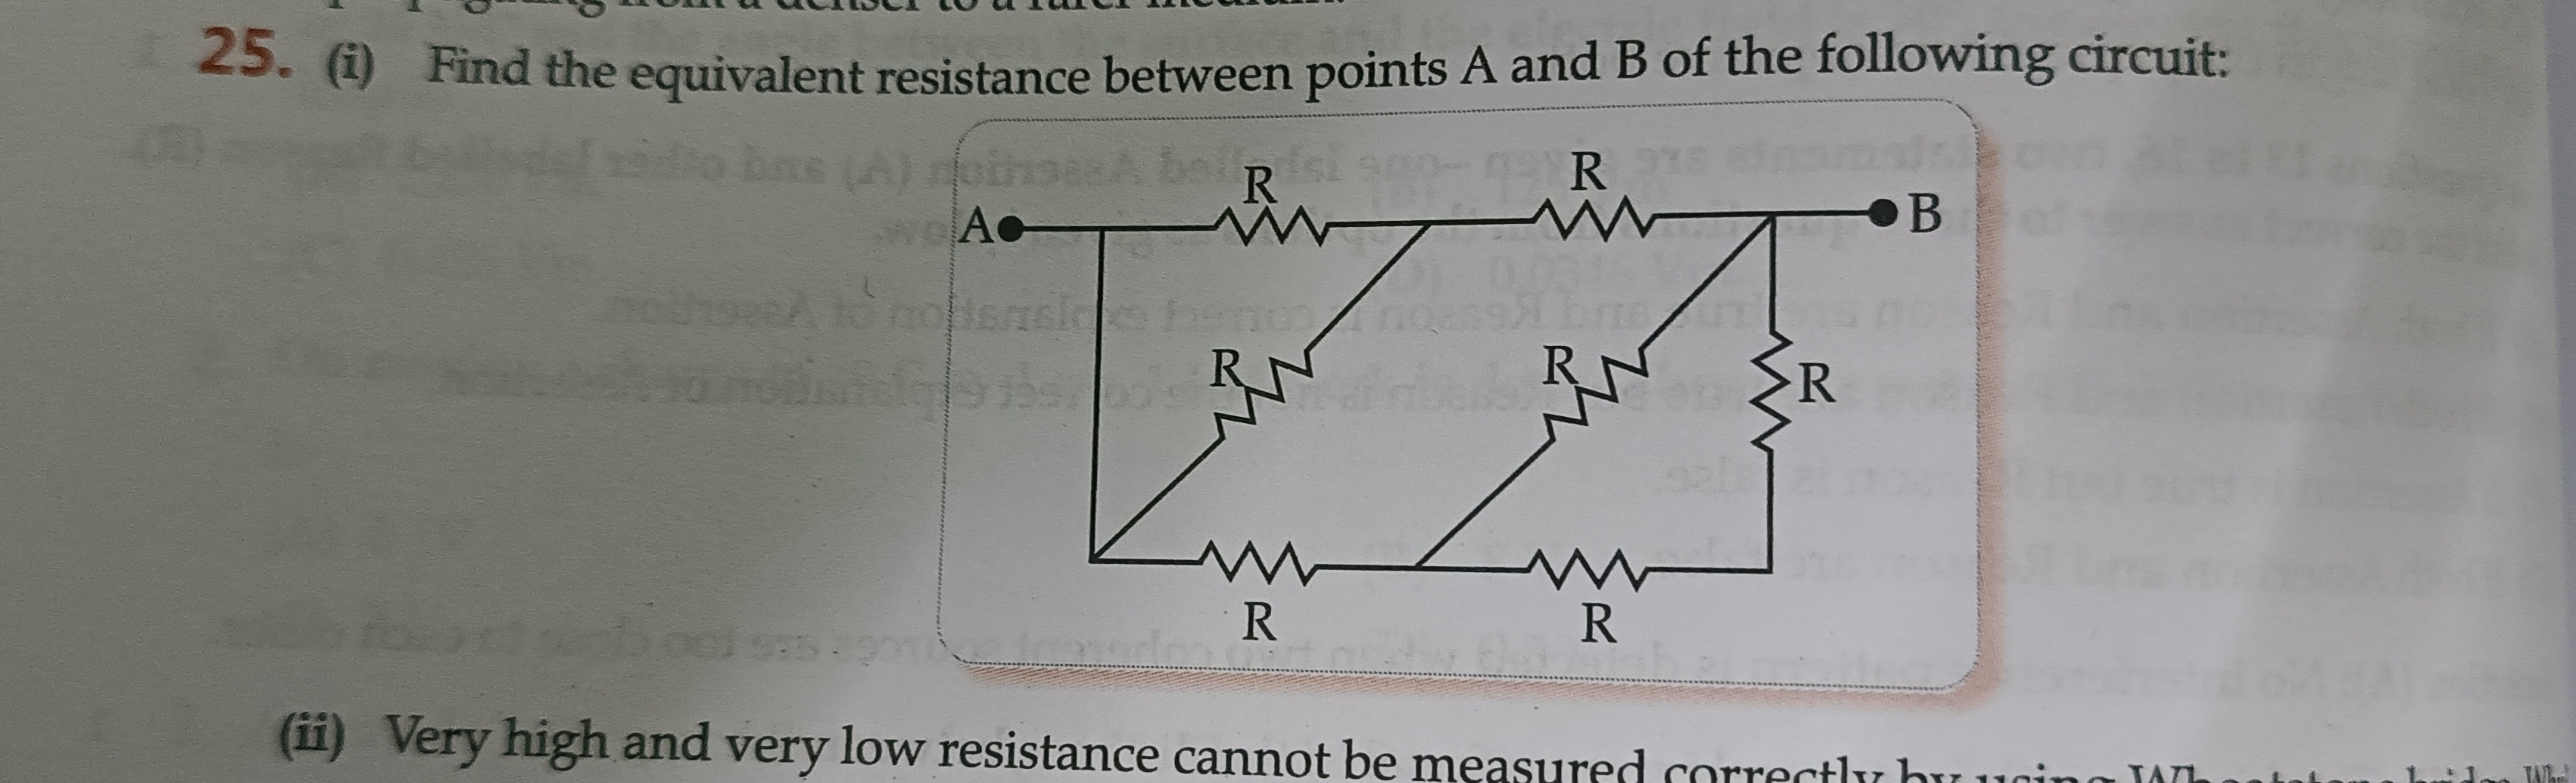 25. (i) Find the equivalent resistance between points A and B of the f